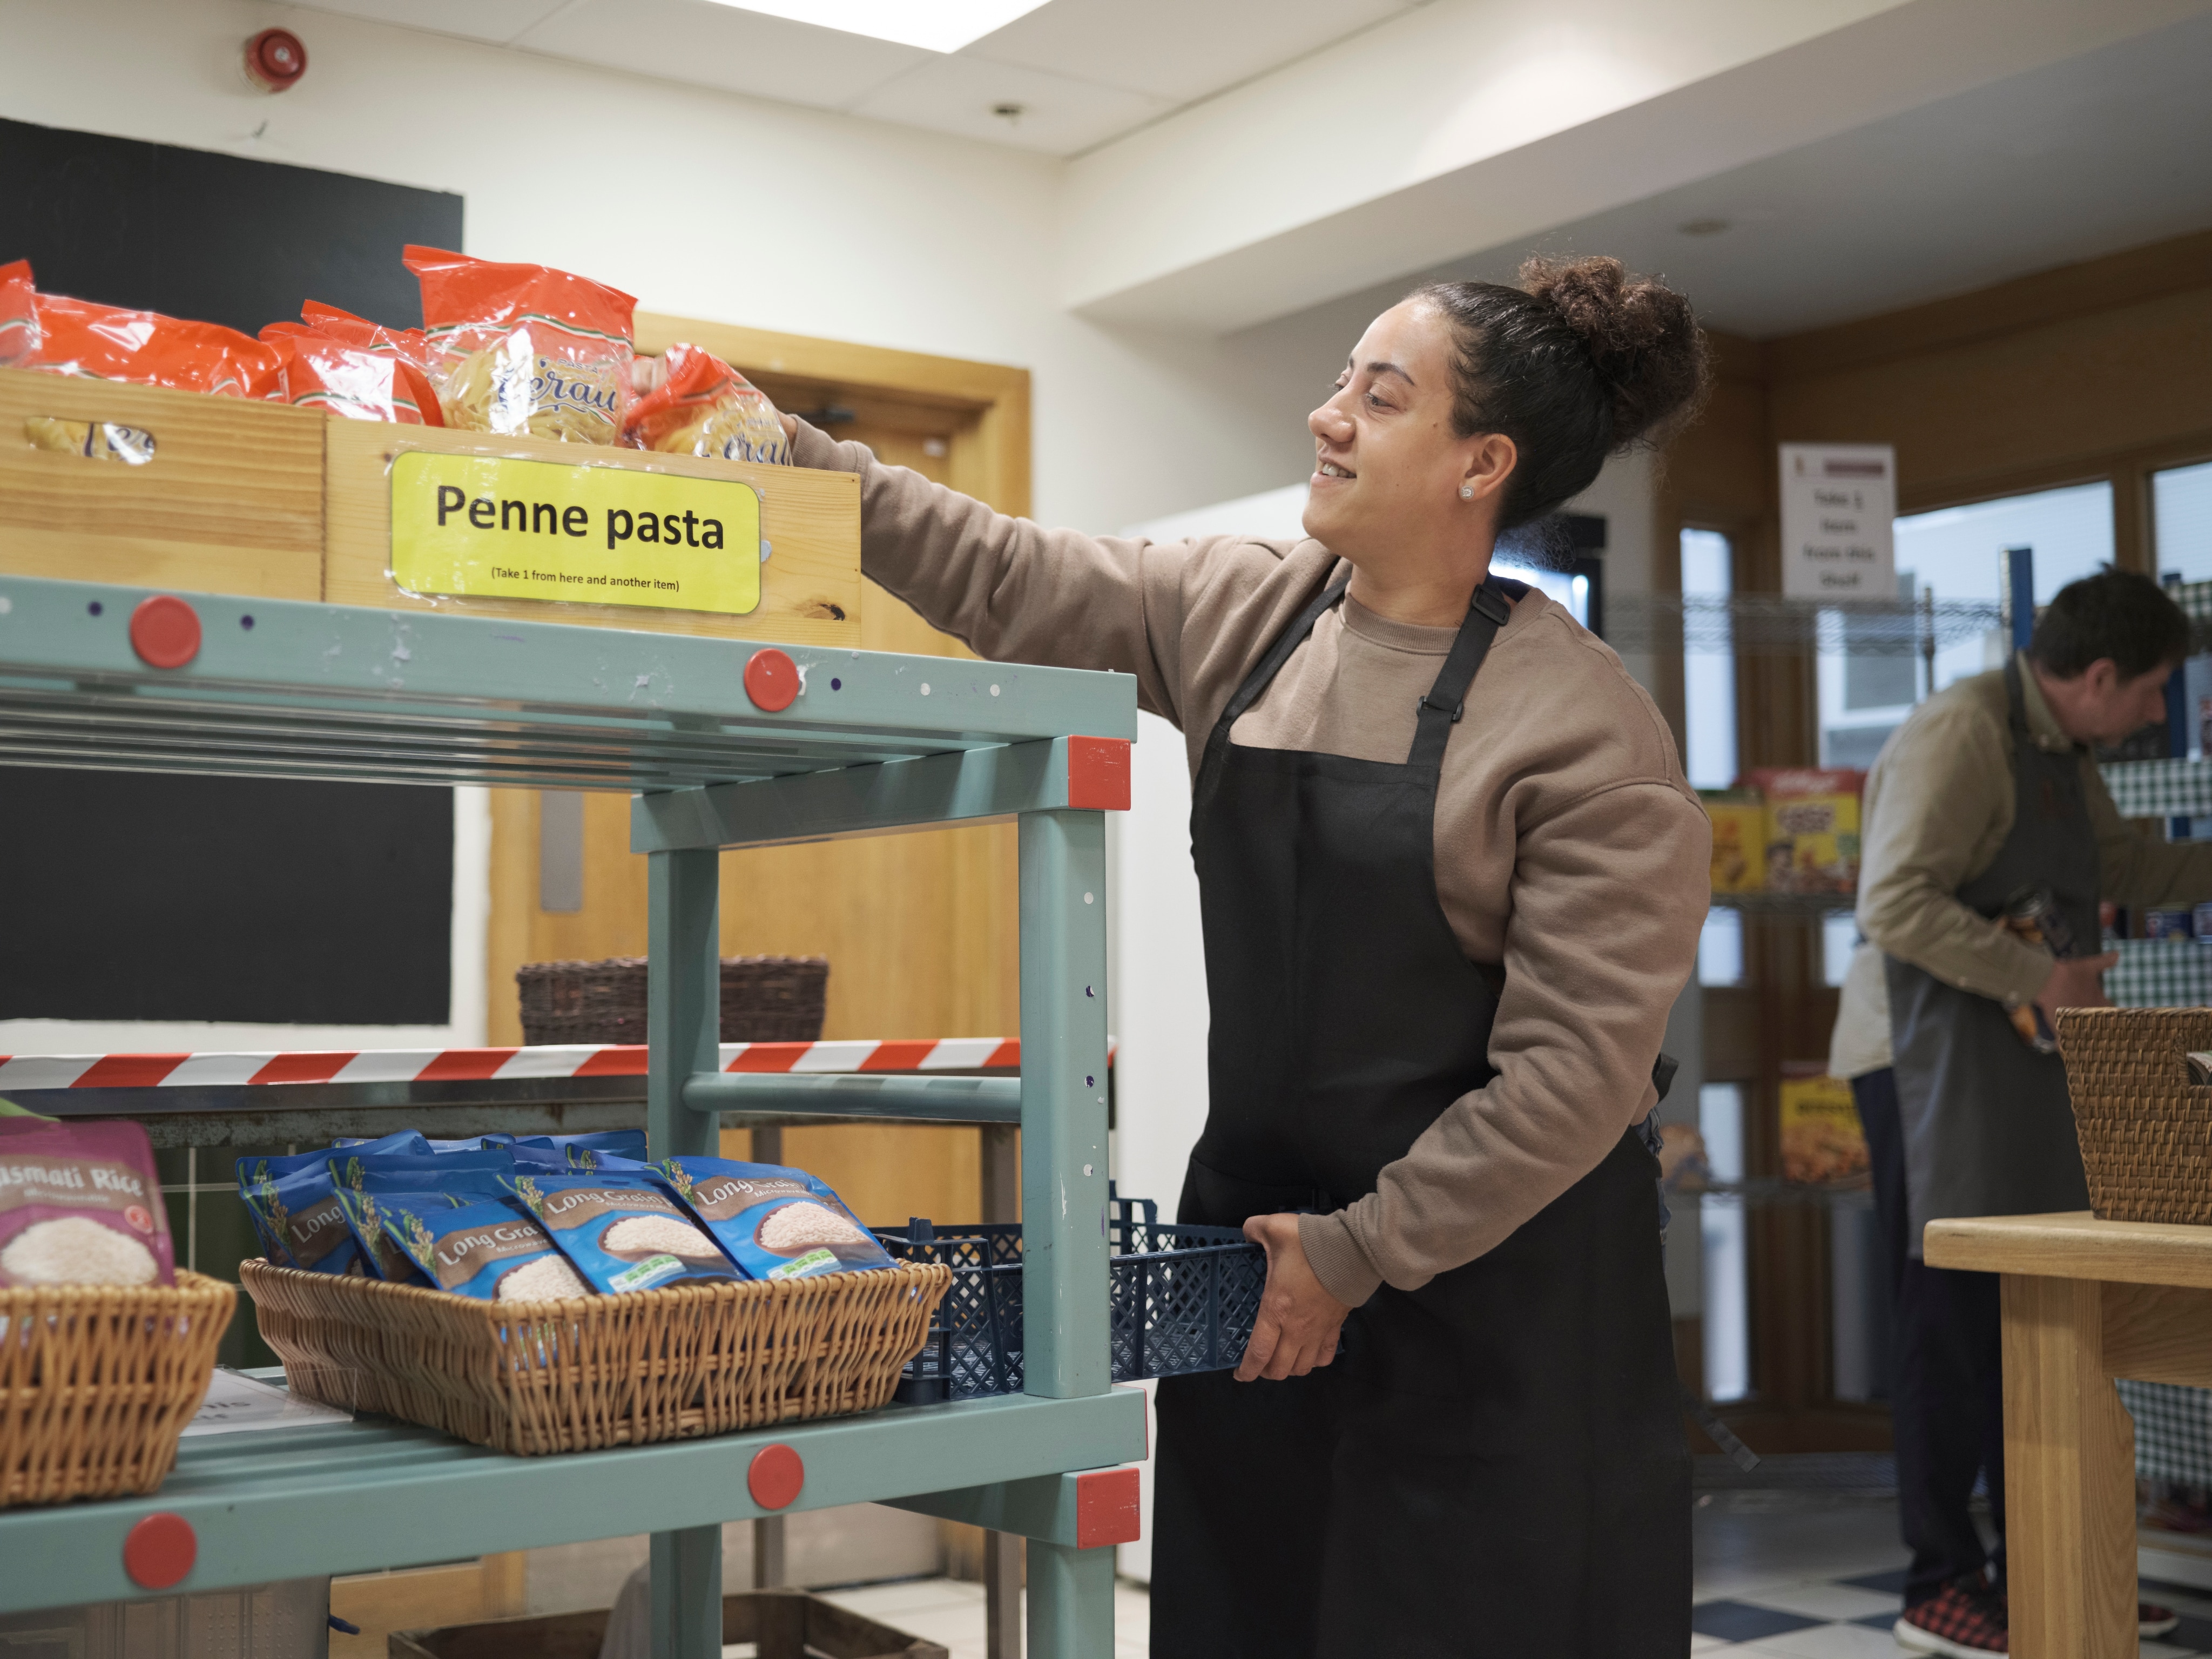 A female food bank employee is grabbing pasta from a shelf. There is a male employee grabbing food behind her, too.